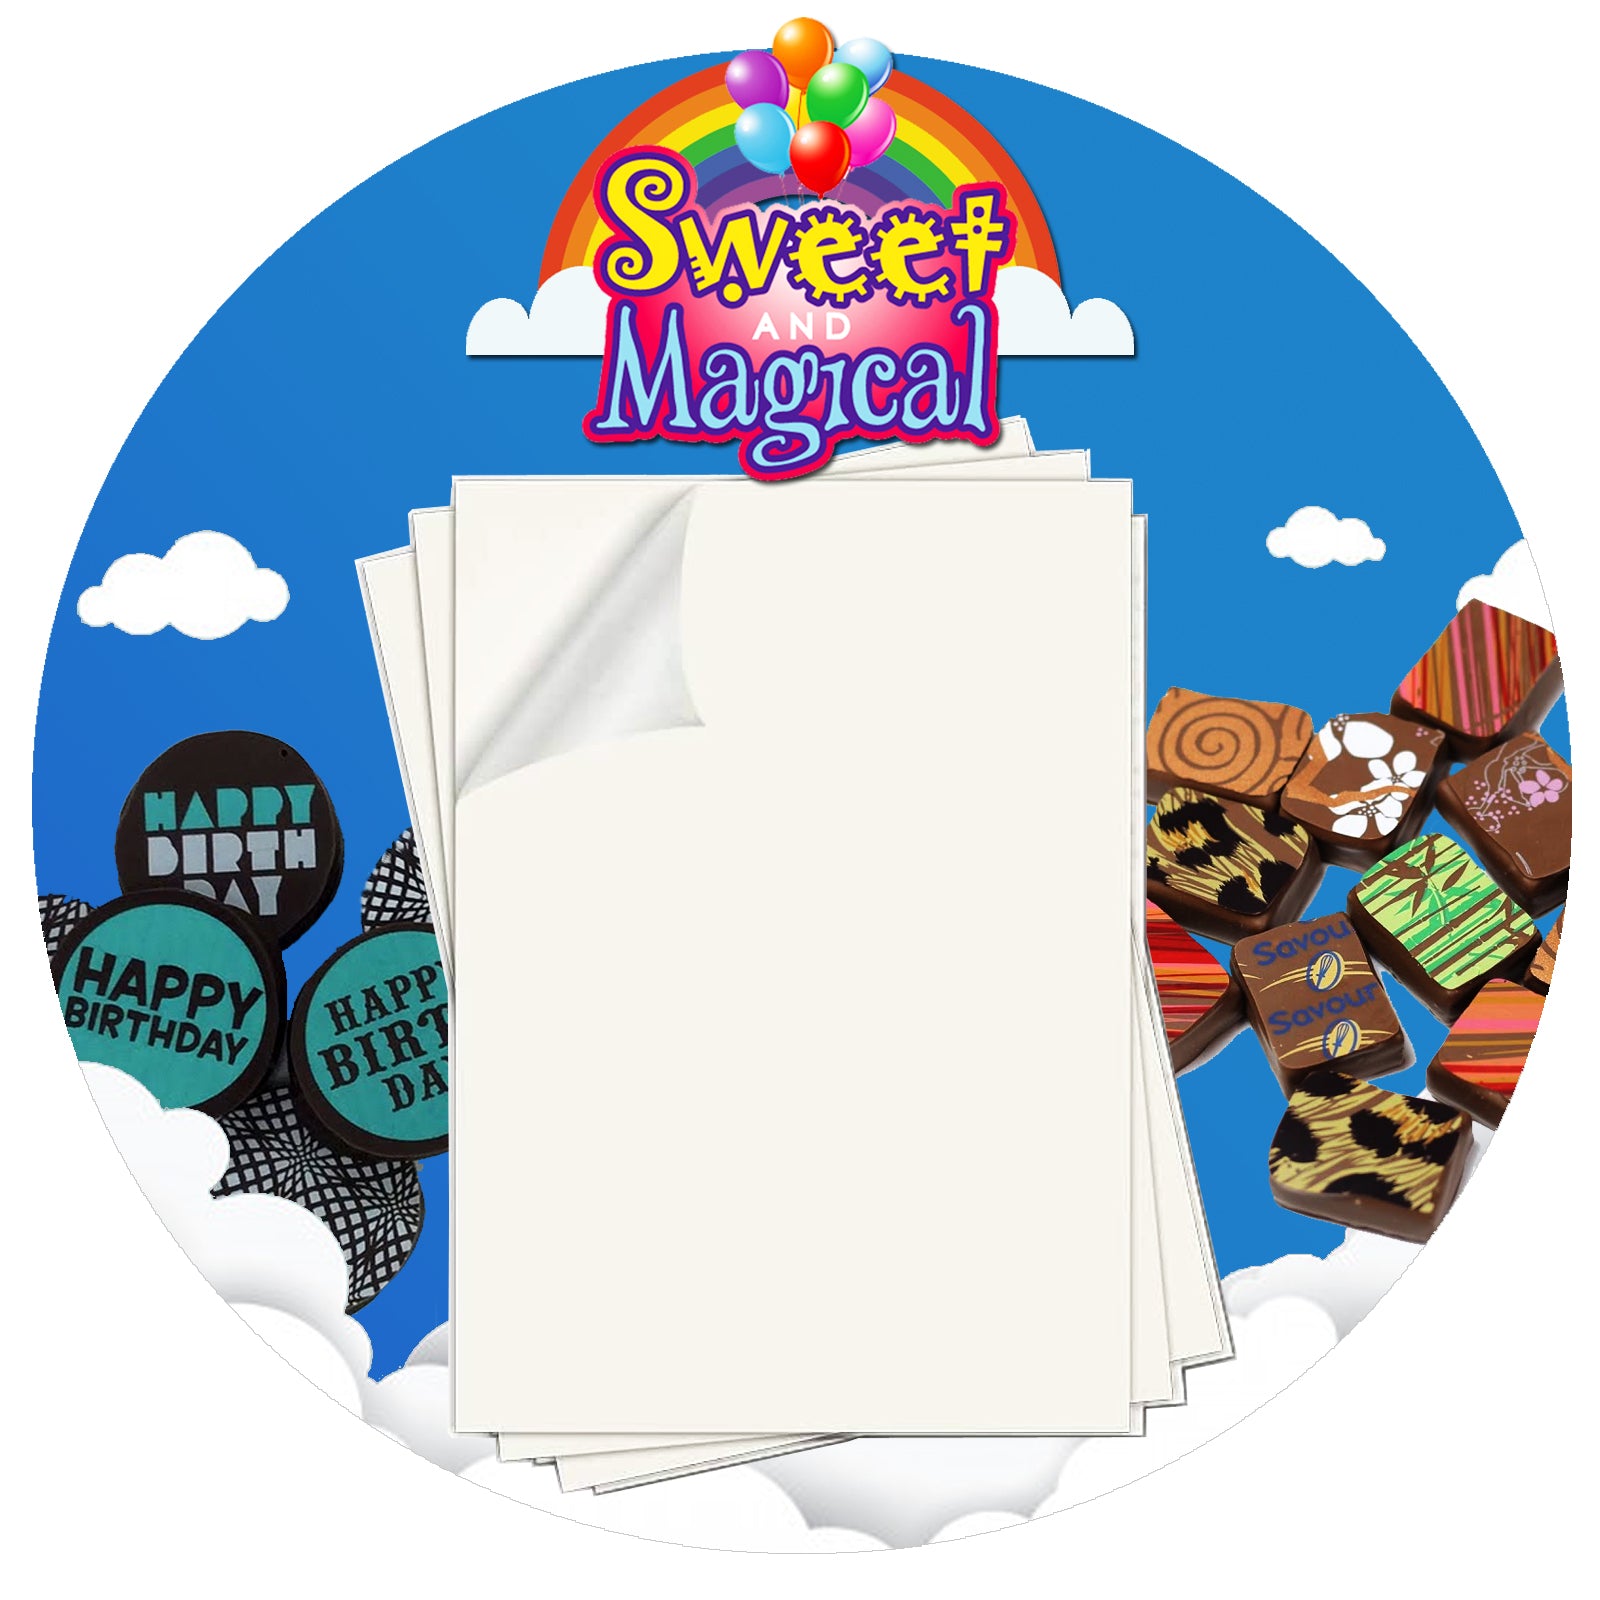 Pack of 50 Chocolate Transfer Sheets for Cakes